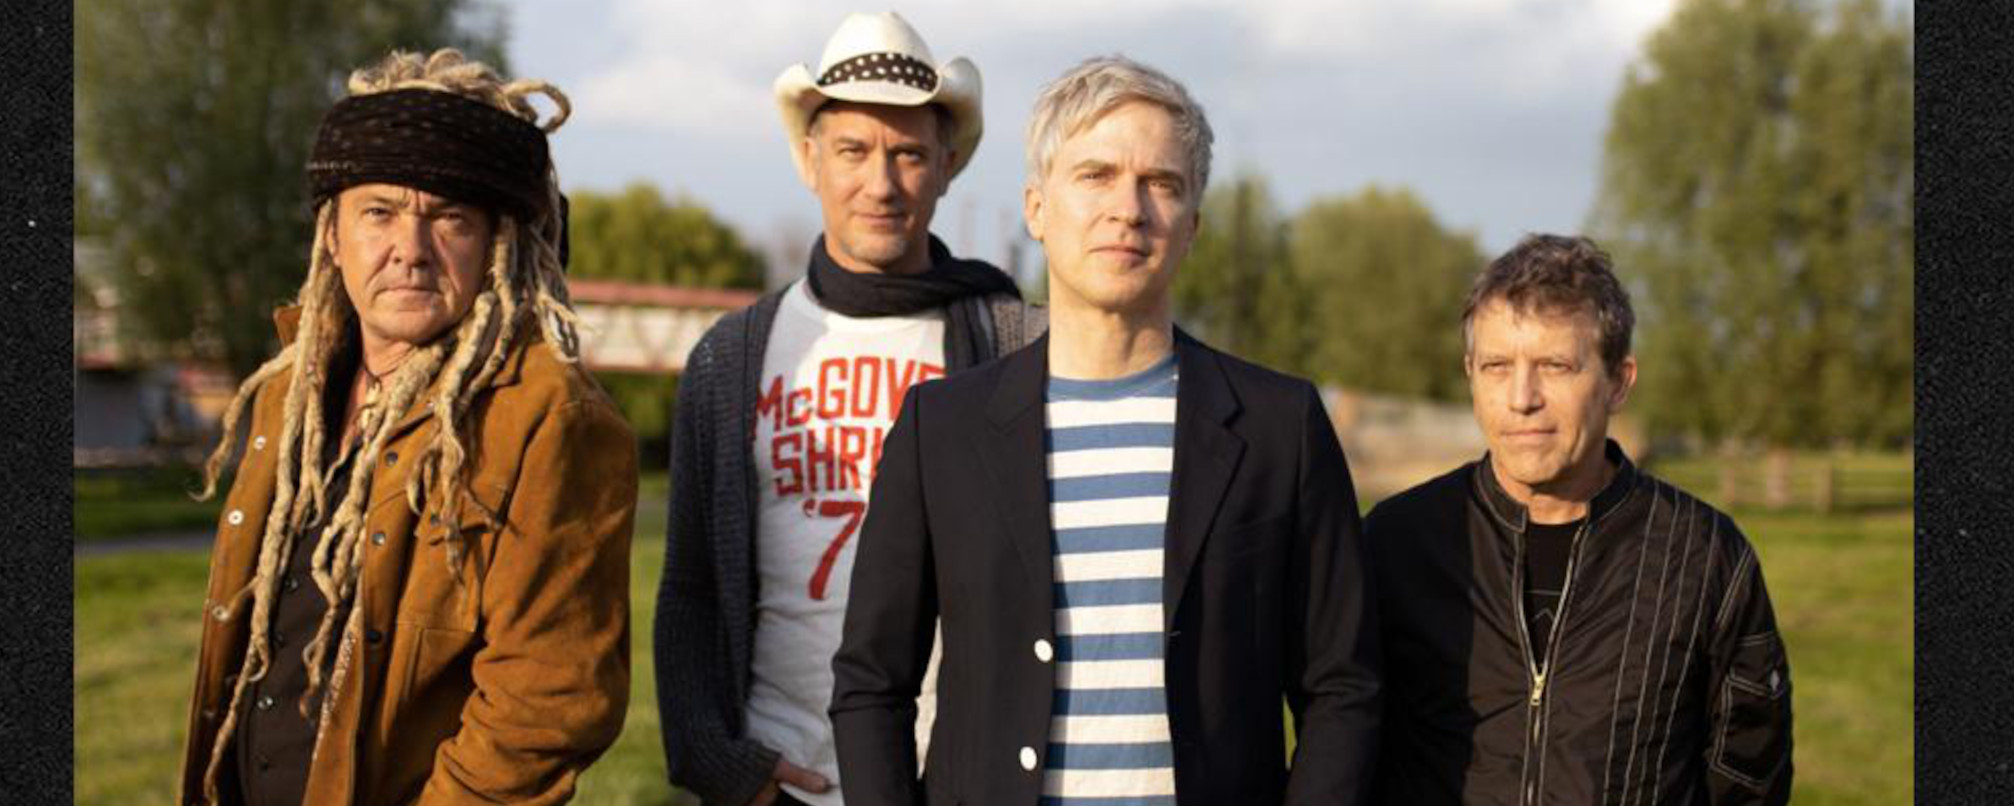 Nada Surf Drops New Video Masterpiece for “Just Wait”